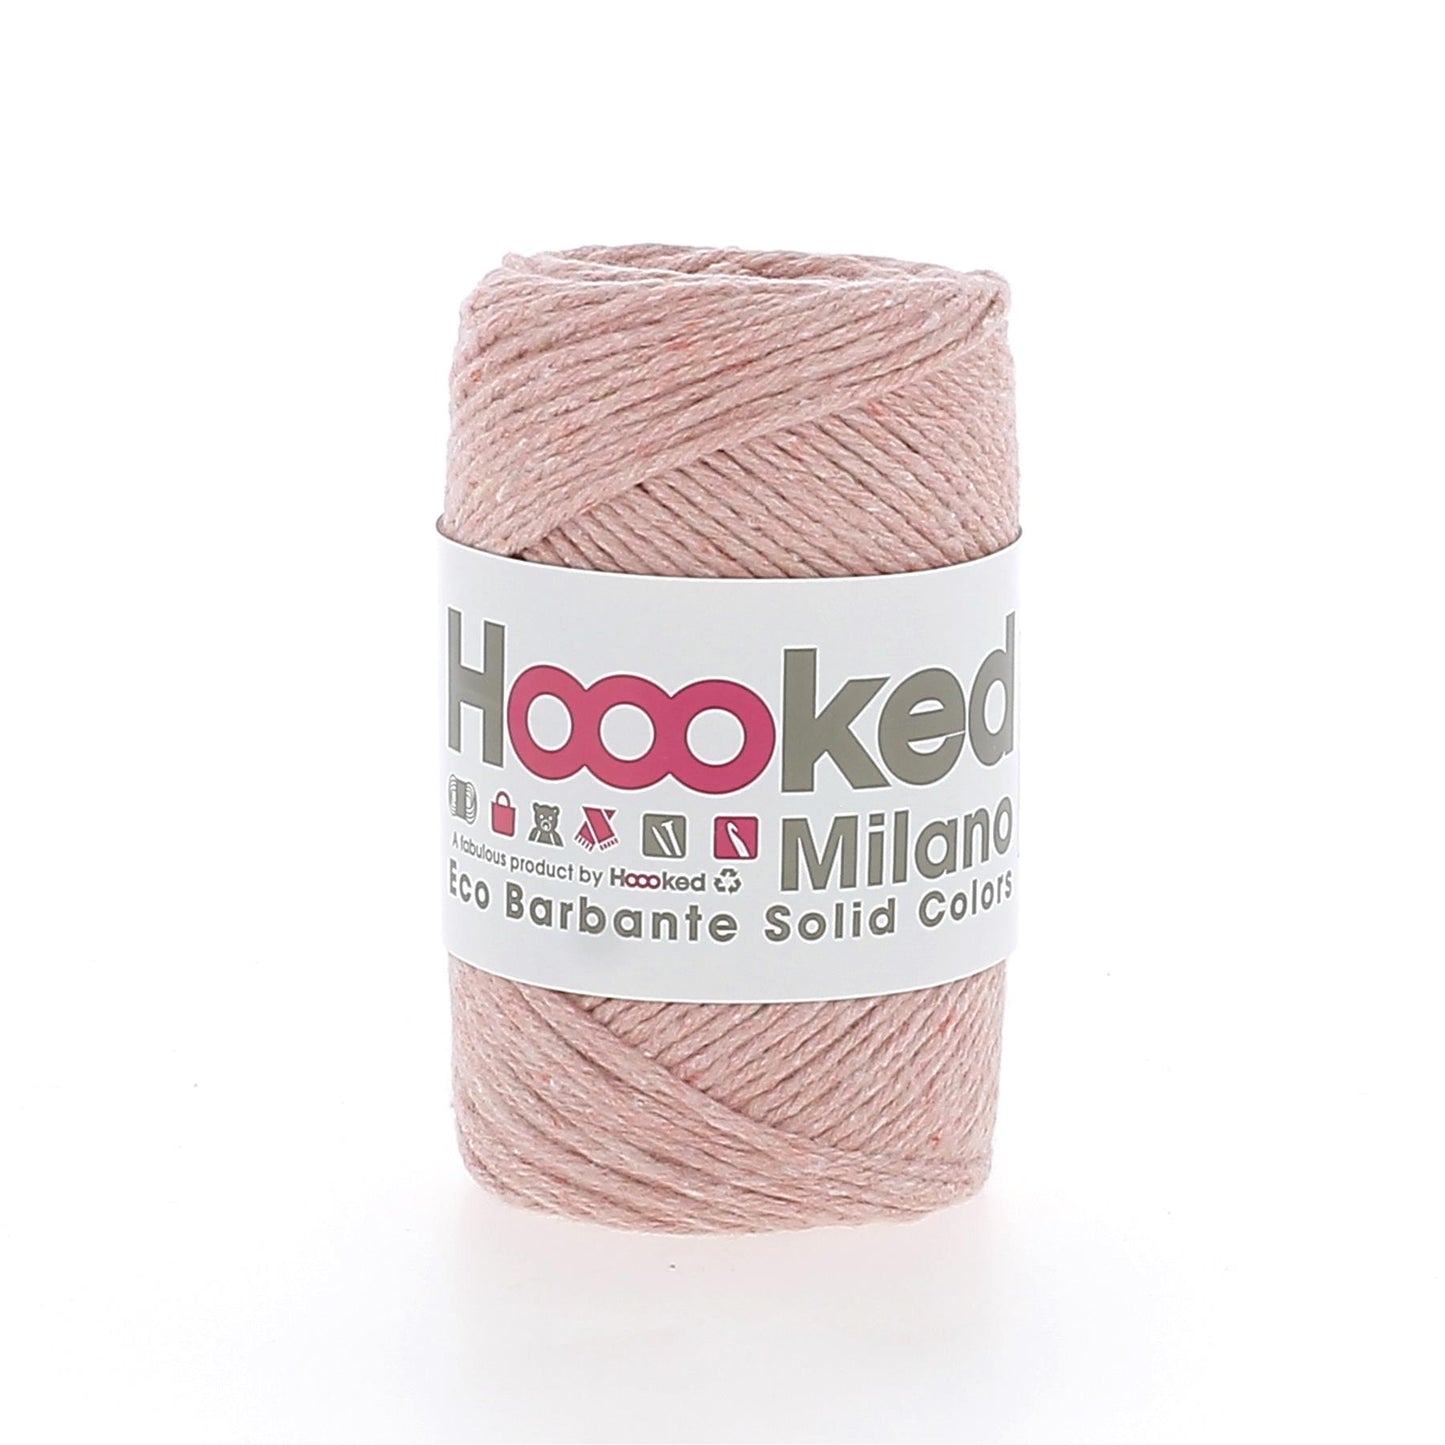 [Hoooked] D700 Eco Barbante Milano Apricot Cotton Yarn - 102M, 100g